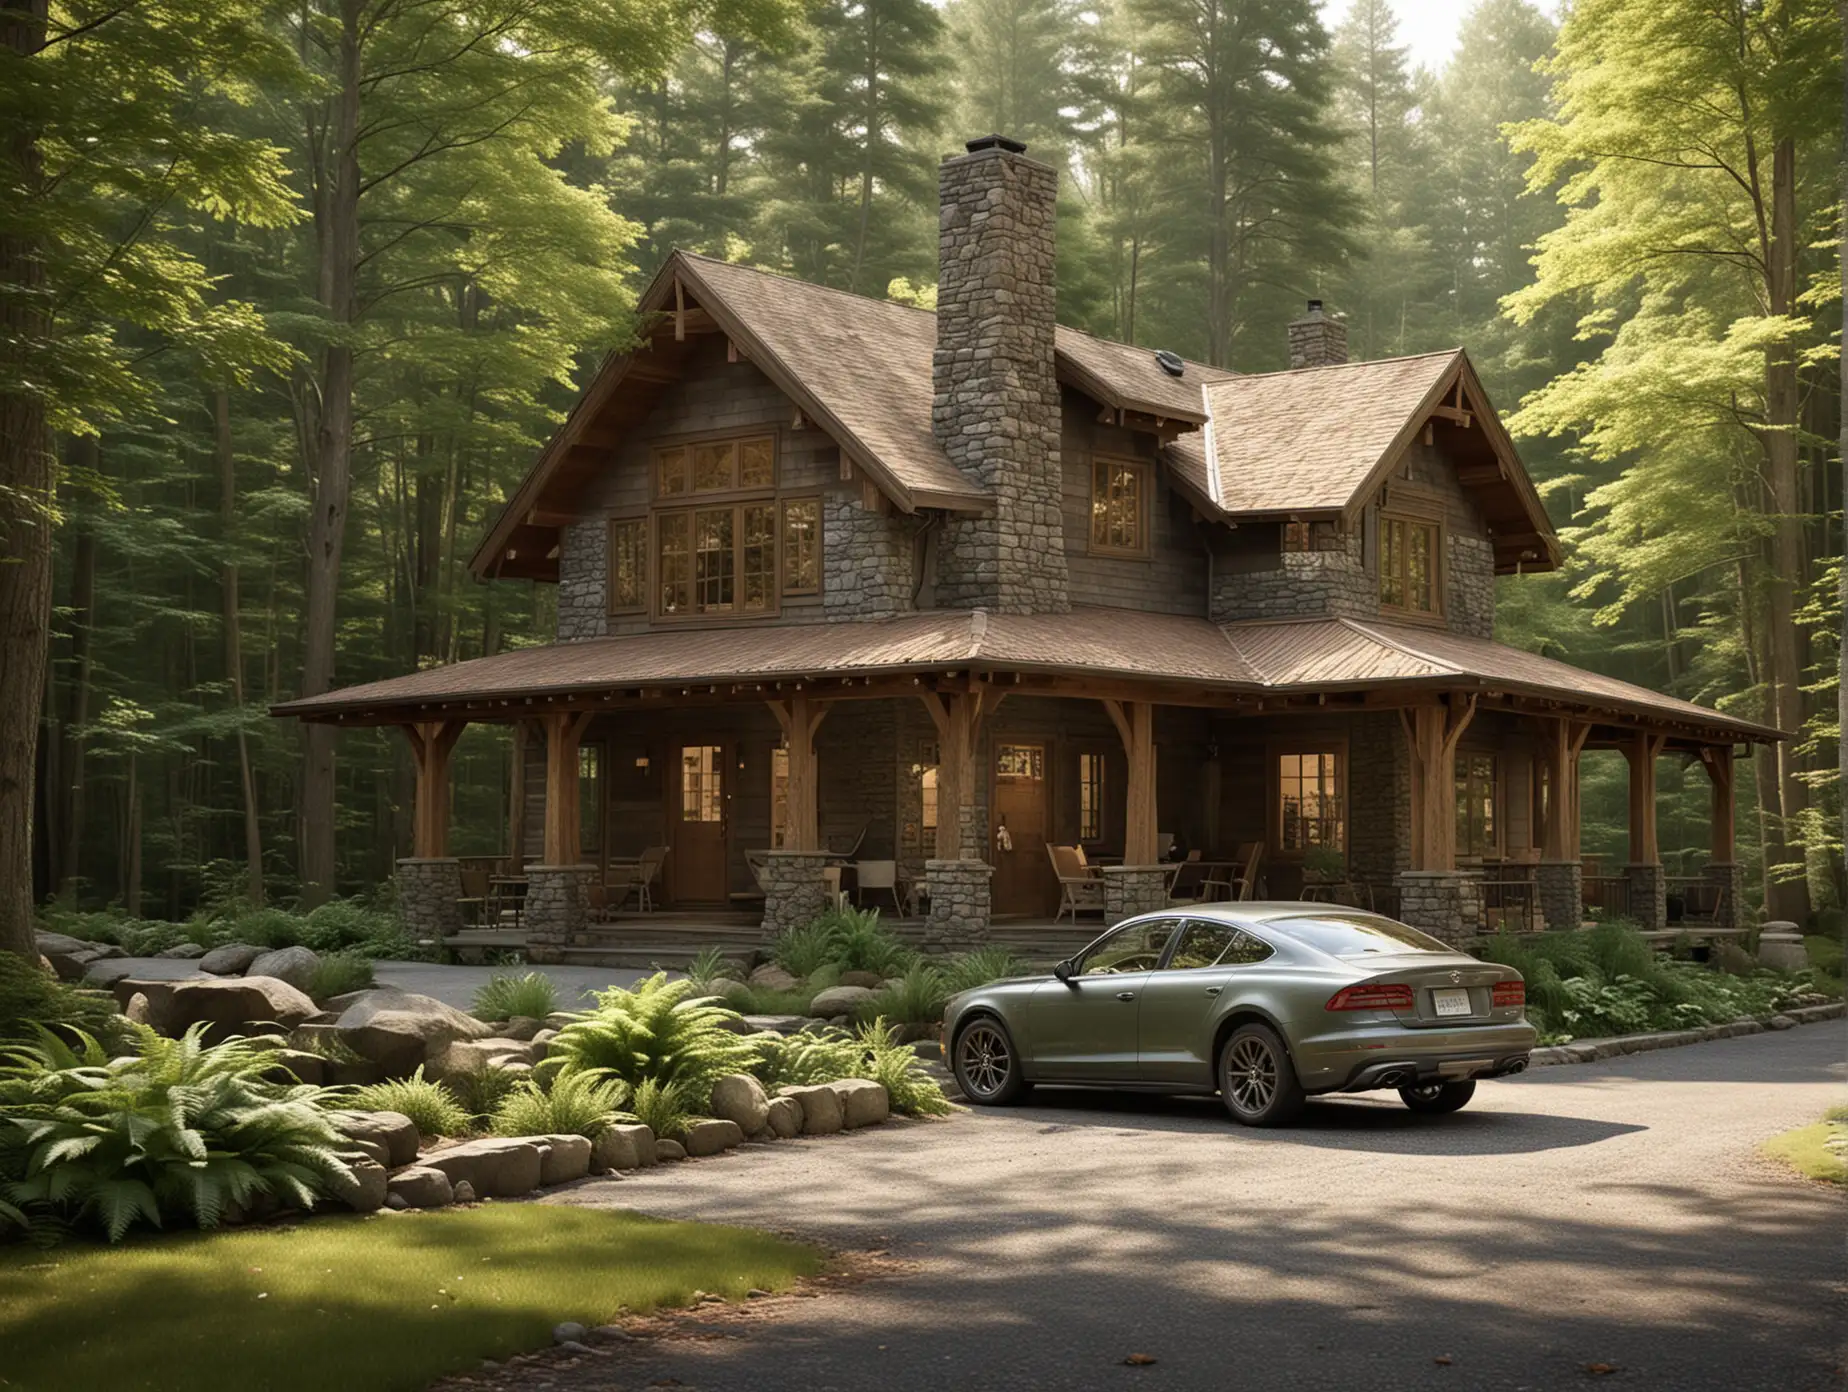 Generate an image showcasing the exterior of a cozy cabin nestled in a forested setting, with a car parked in its driveway. The cabin should exude rustic charm, featuring natural materials such as wood and stone, and a warm color palette that blends harmoniously with the surrounding environment. Incorporate elements such as a sloped roof, wooden beams, and a welcoming front porch with comfortable seating. The car parked in the driveway should be a rugged yet stylish model, reflecting the owner's appreciation for outdoor adventures. Surrounding nature, such as tall trees, ferns, and dappled sunlight filtering through the foliage, should create a tranquil and idyllic backdrop. The overall composition should evoke a sense of coziness, warmth, and a deep connection to nature, inviting viewers to imagine the peaceful retreat this cabin provides amidst the beauty of the forest.